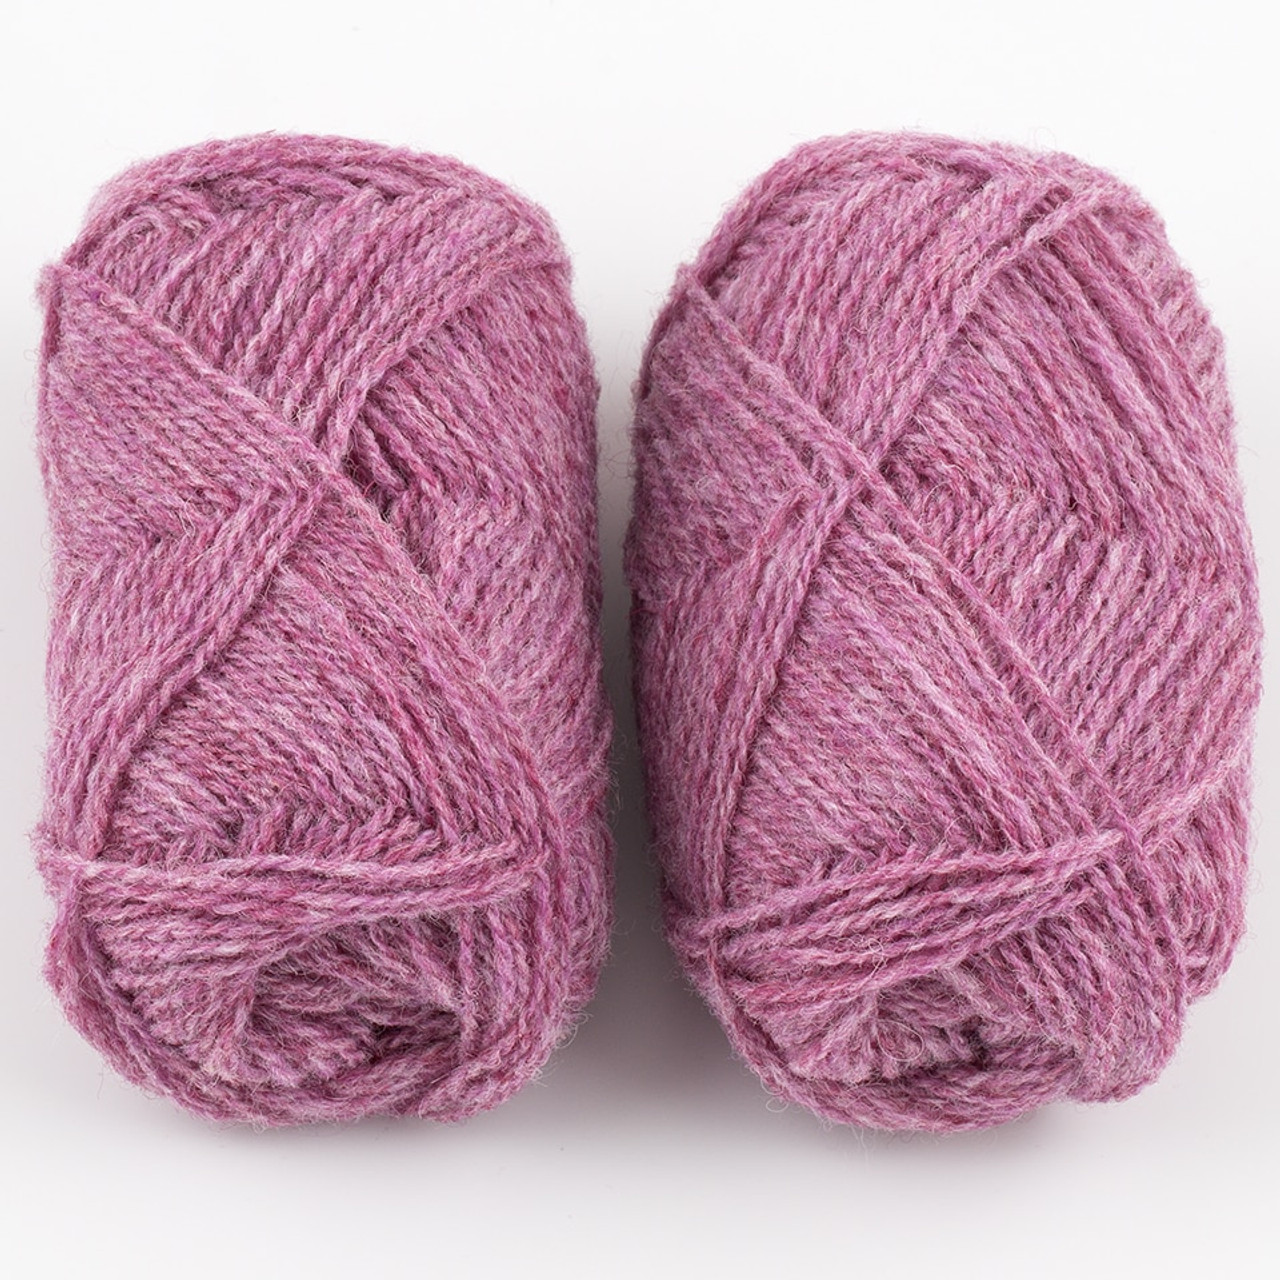 Jamieson & Smith, 2ply Jumper Weight // FC22 Mix